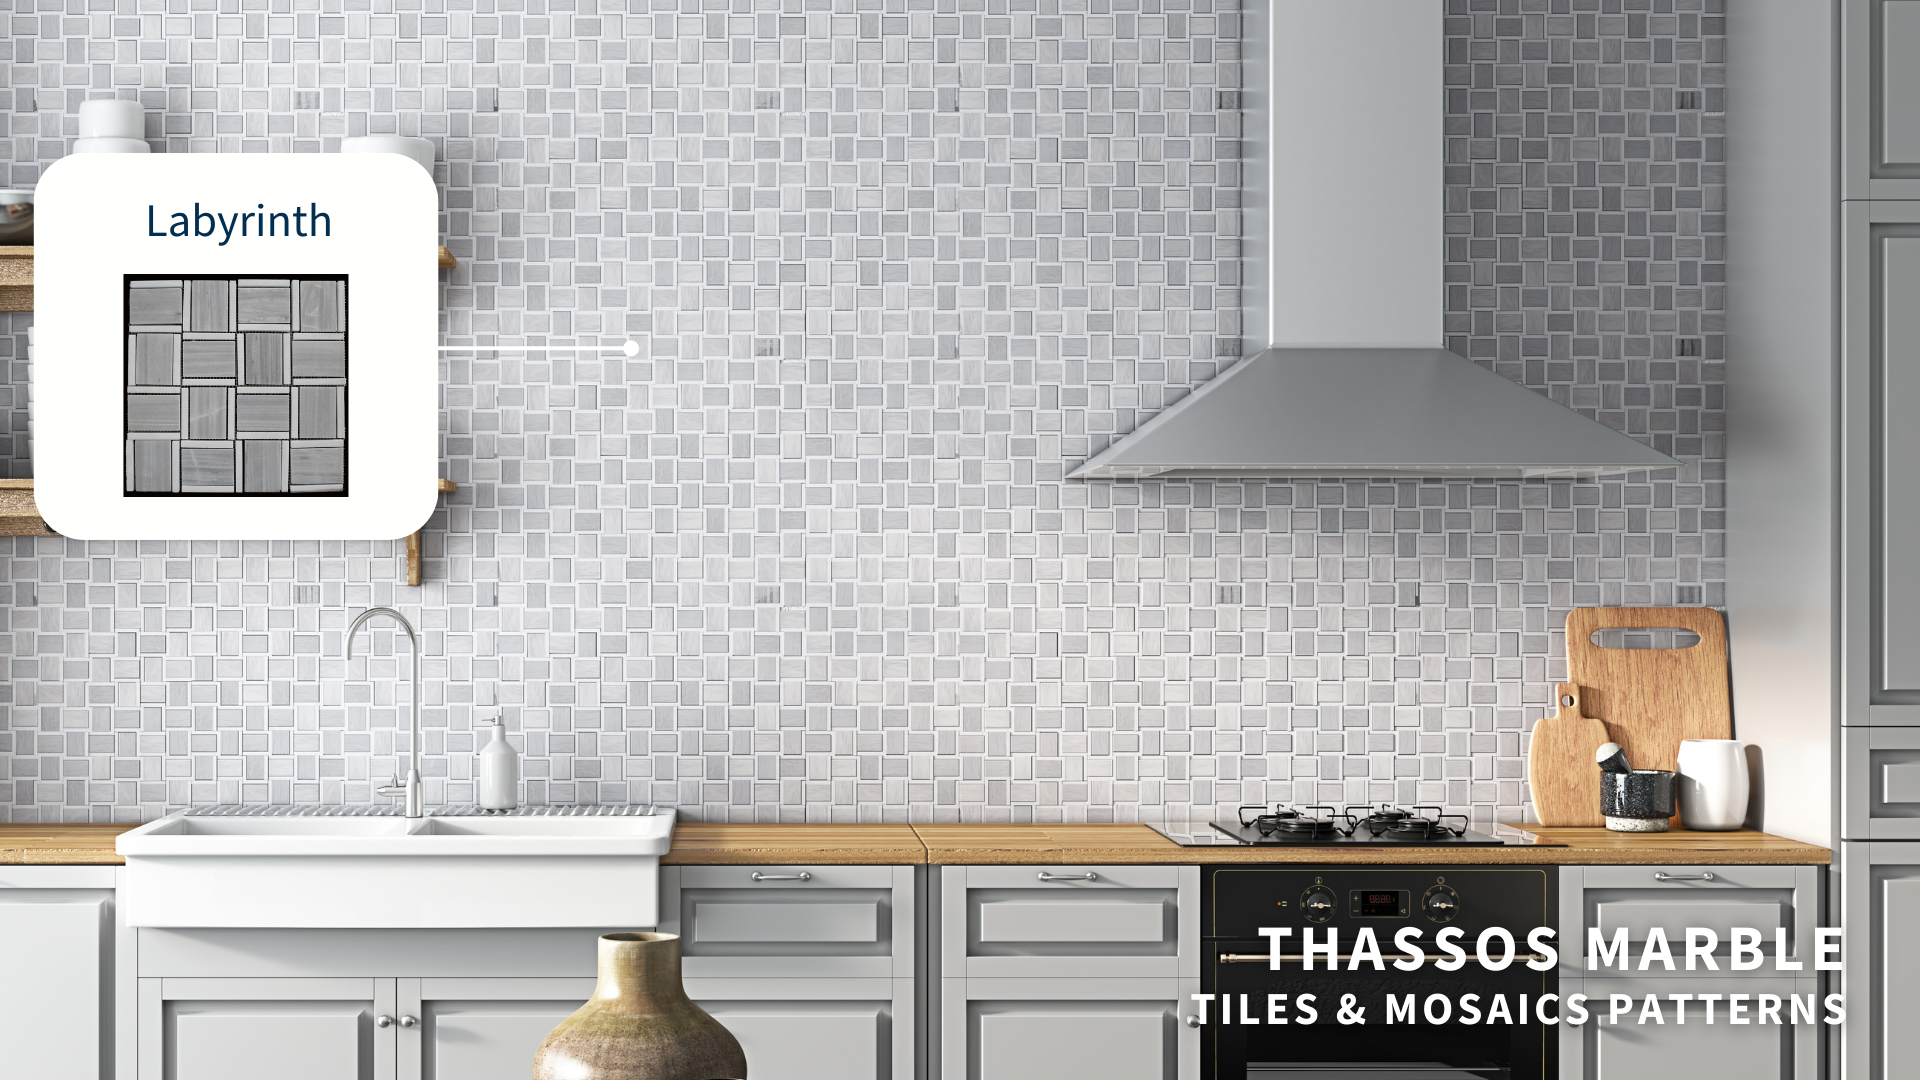 Backsplash in modern kitchen, with complex labyrinth mosaic pattern of Thassos marble and wooden elements